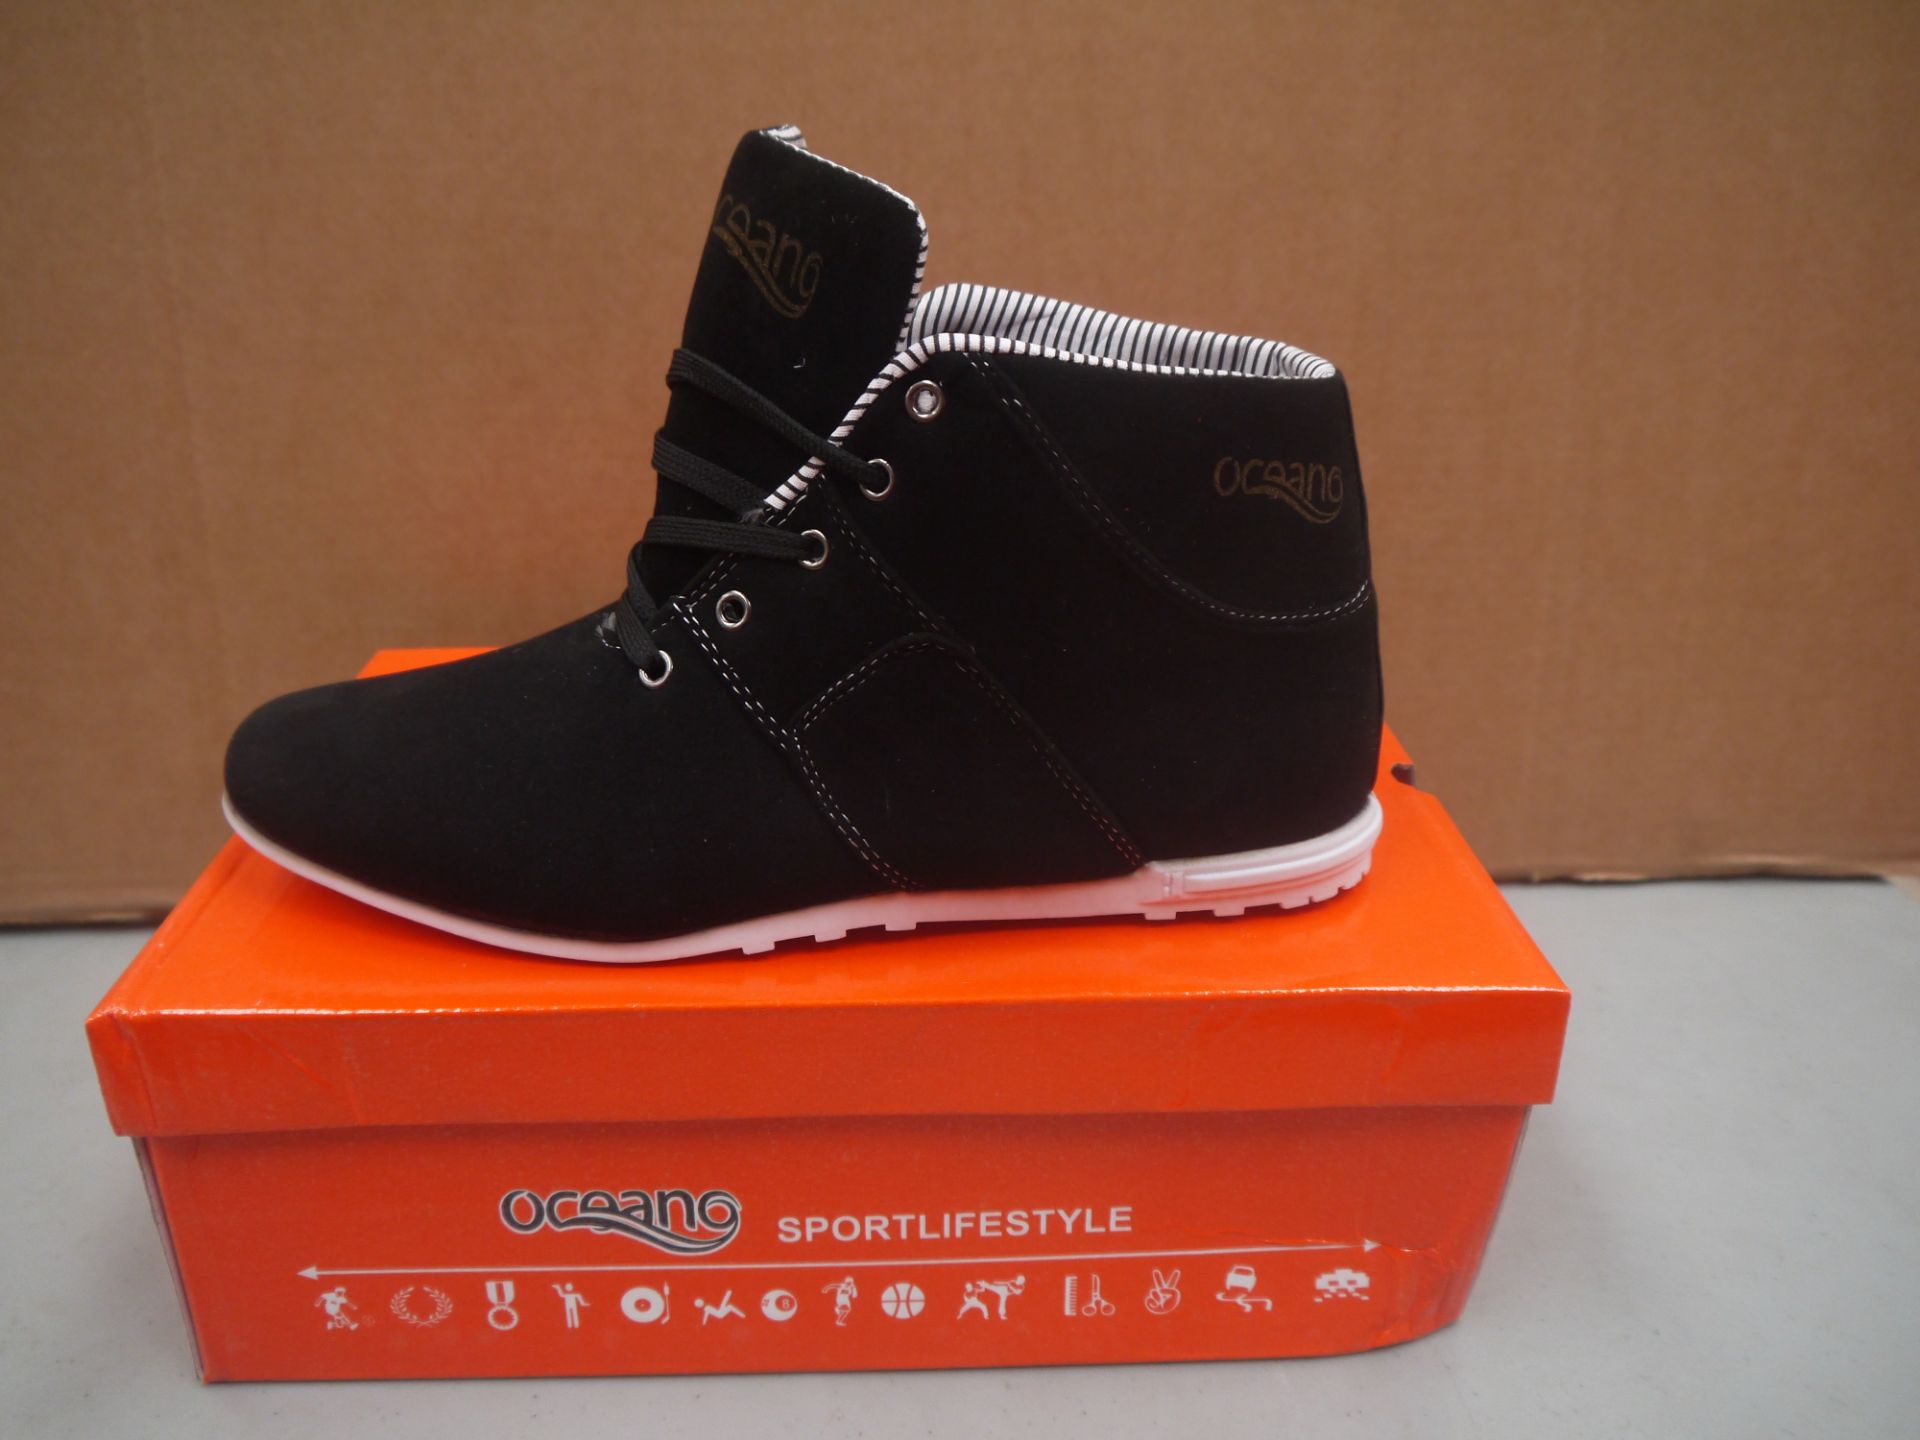 Mens Black Suede Oceano trainer style boot new and boxed size UK7